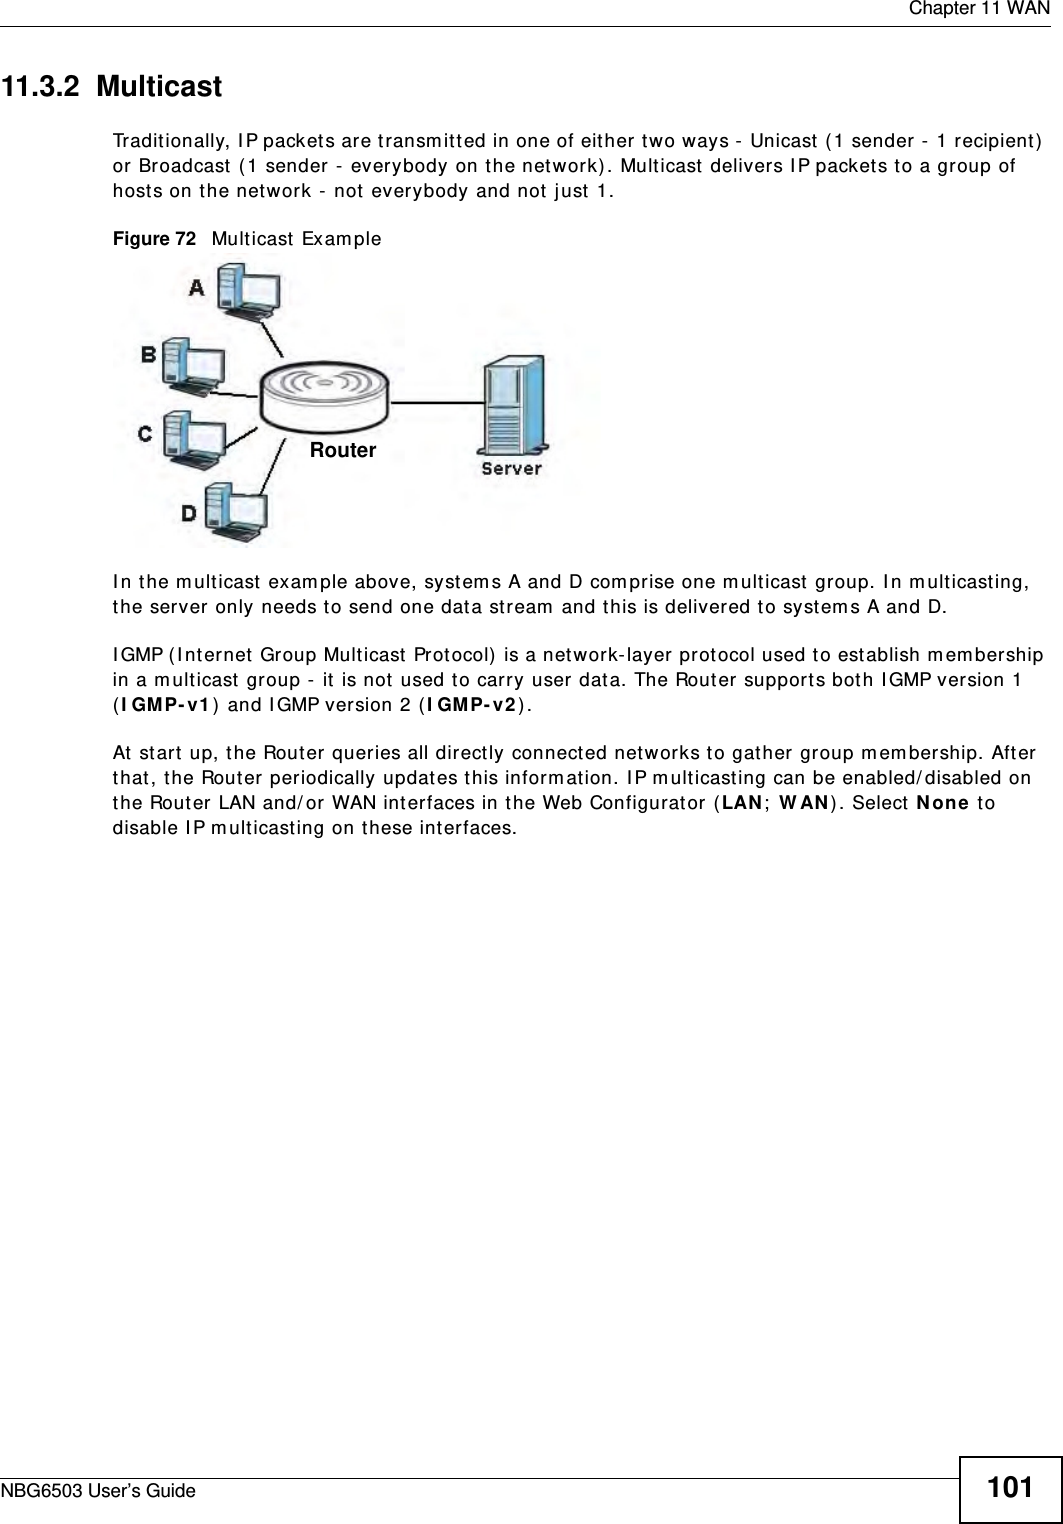  Chapter 11 WANNBG6503 User’s Guide 10111.3.2  MulticastTraditionally, IP packets are transmitted in one of either two ways - Unicast (1 sender - 1 recipient) or Broadcast (1 sender - everybody on the network). Multicast delivers IP packets to a group of hosts on the network - not everybody and not just 1. Figure 72   Multicast ExampleIn the multicast example above, systems A and D comprise one multicast group. In multicasting, the server only needs to send one data stream and this is delivered to systems A and D. IGMP (Internet Group Multicast Protocol) is a network-layer protocol used to establish membership in a multicast group - it is not used to carry user data. The Router supports both IGMP version 1 (IGMP-v1) and IGMP version 2 (IGMP-v2). At start up, the Router queries all directly connected networks to gather group membership. After that, the Router periodically updates this information. IP multicasting can be enabled/disabled on the Router LAN and/or WAN interfaces in the Web Configurator (LAN; WAN). Select None to disable IP multicasting on these interfaces.Router